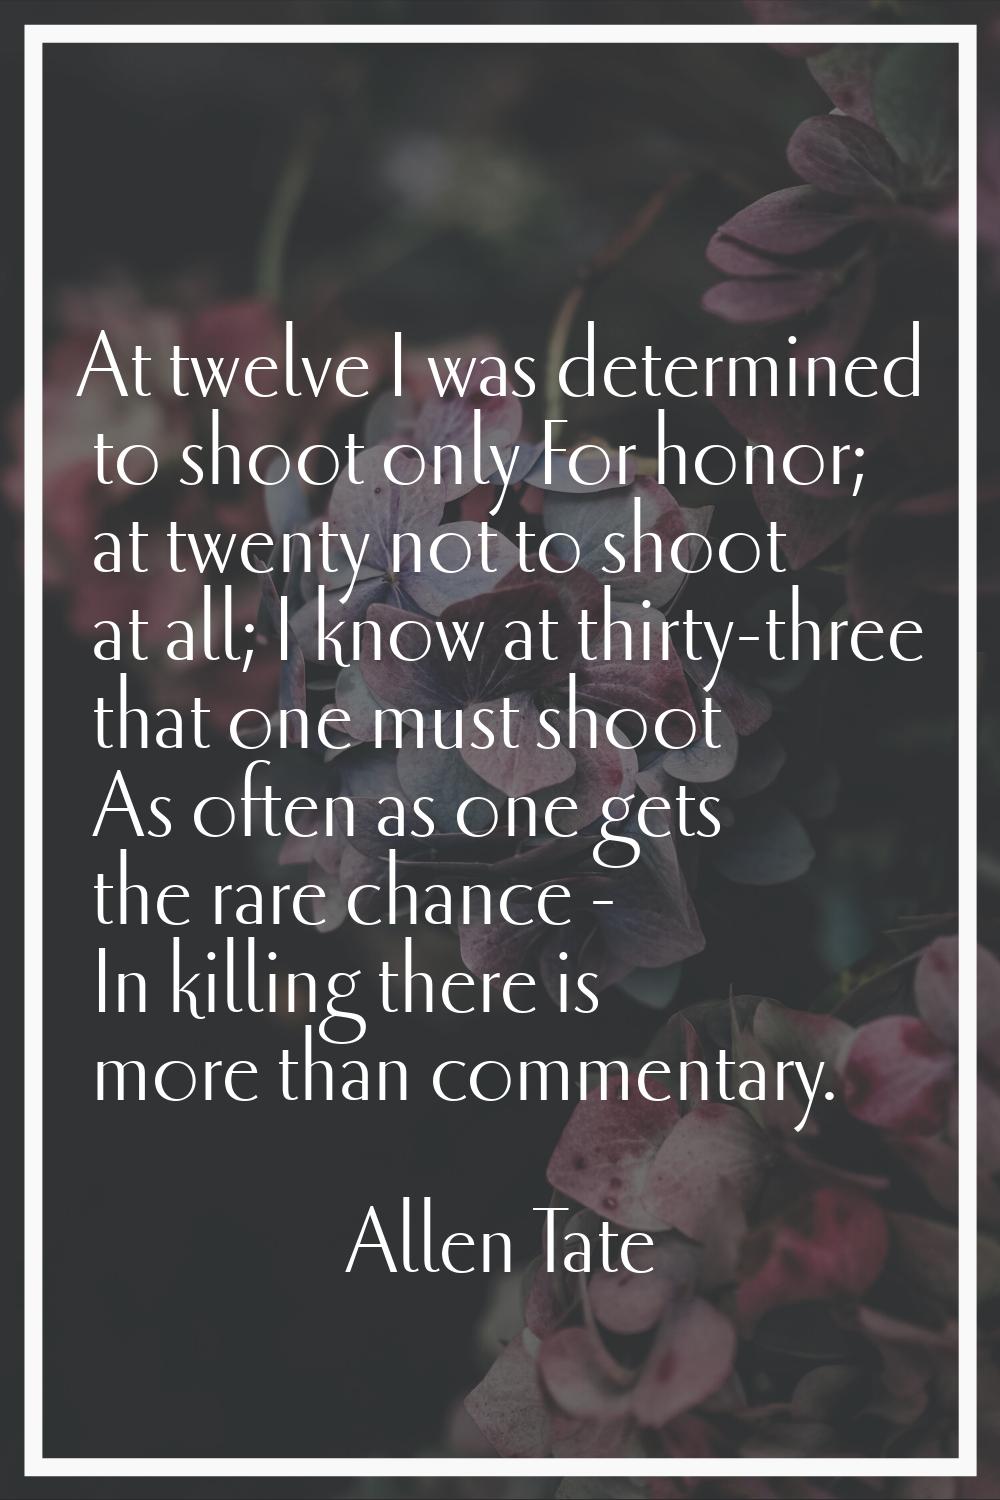 At twelve I was determined to shoot only For honor; at twenty not to shoot at all; I know at thirty